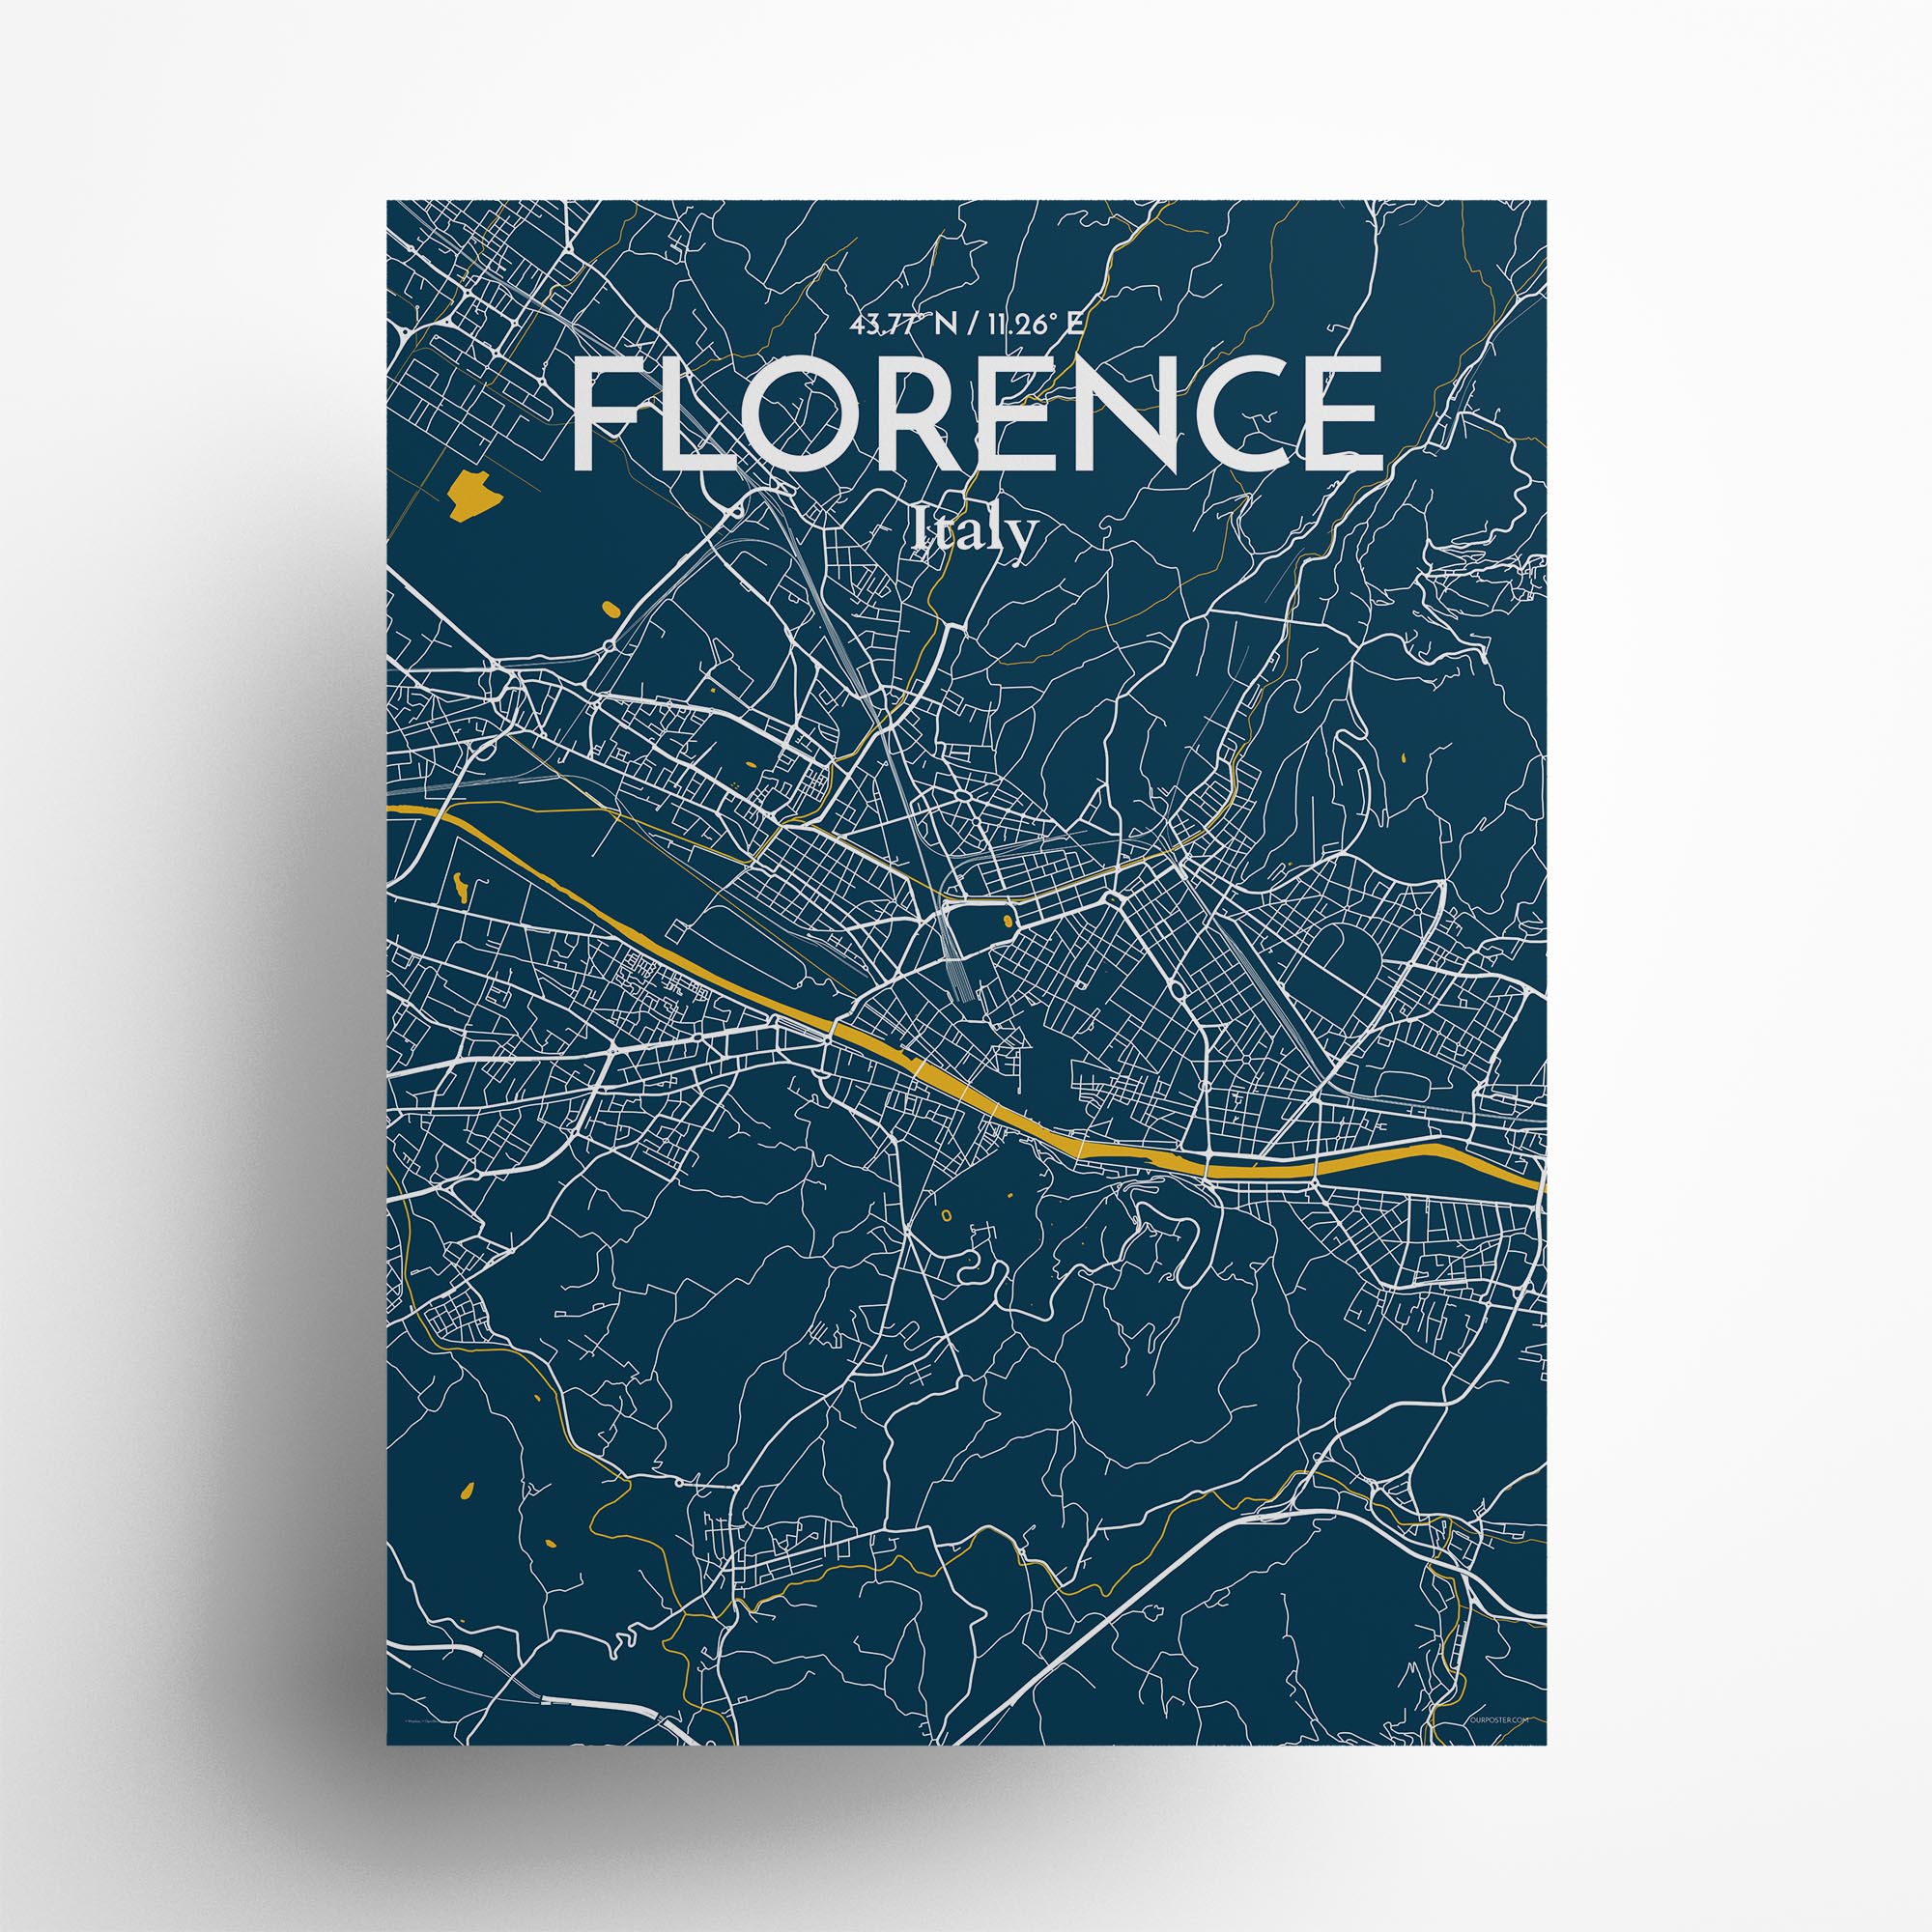 Florence city map poster in Amuse of size 18" x 24"